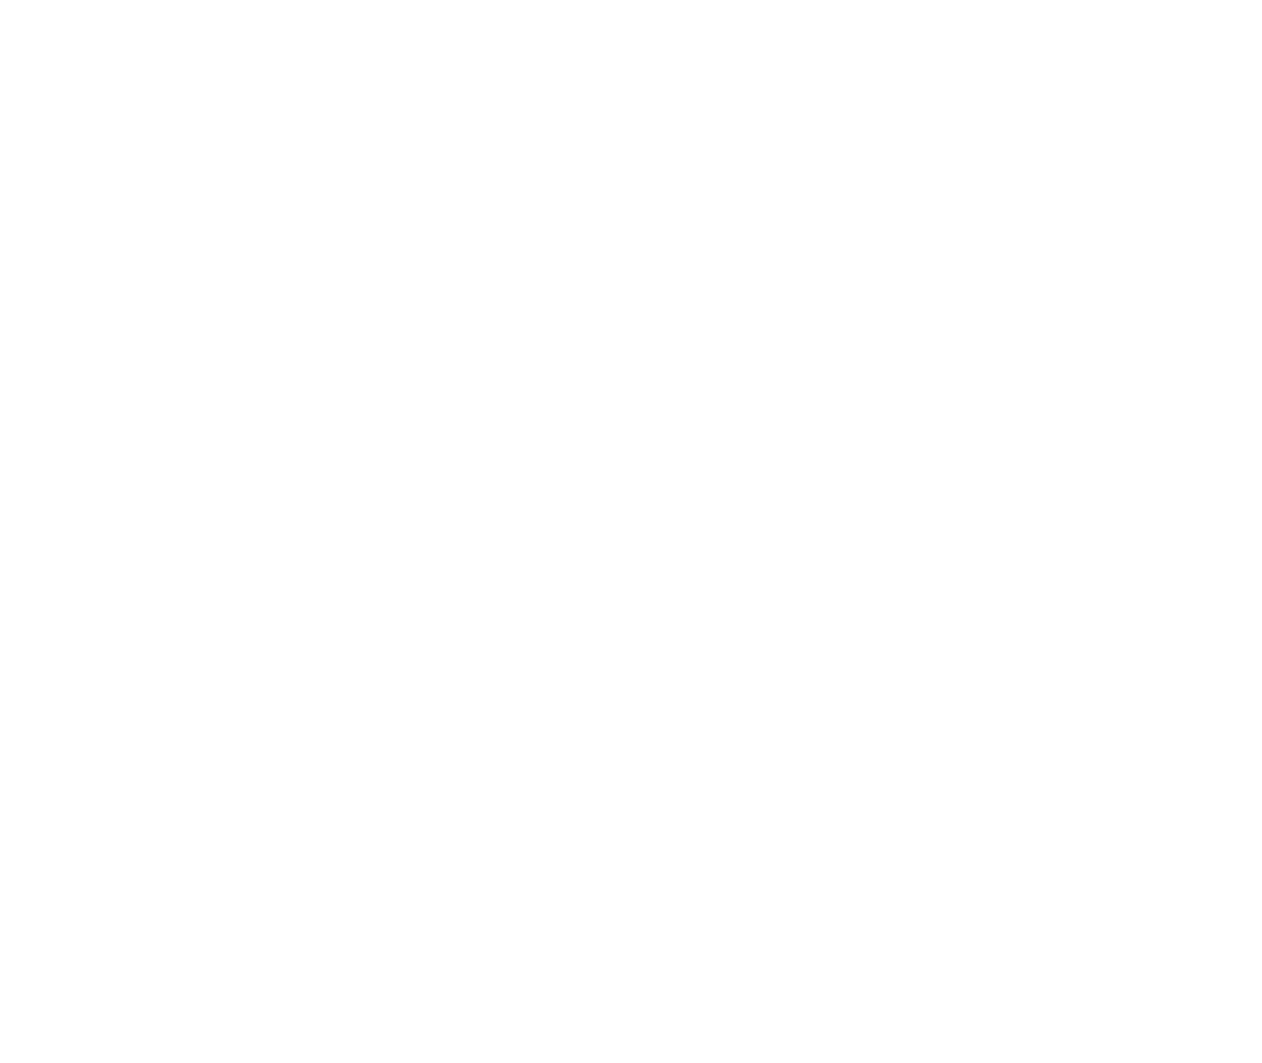 Exemplar of heritage: Fan Kuan and His influence in Chinese Painting